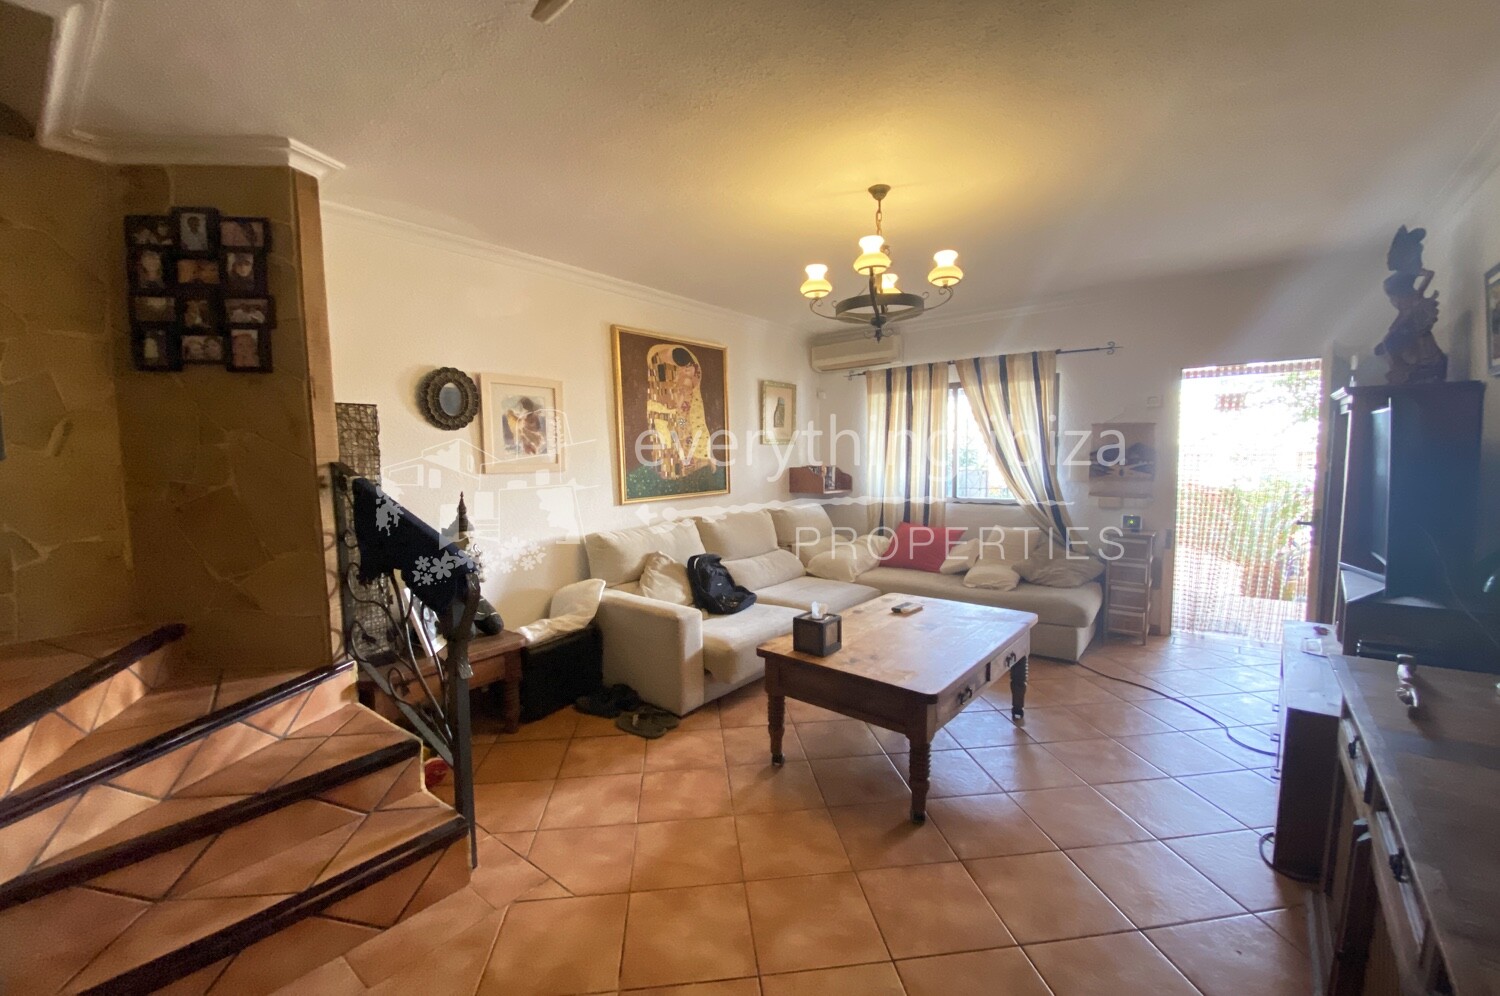 Charming Traditionally Styled Townhouse Close to the Beach, ref. 1507, for sale in Ibiza by everything ibiza Properties